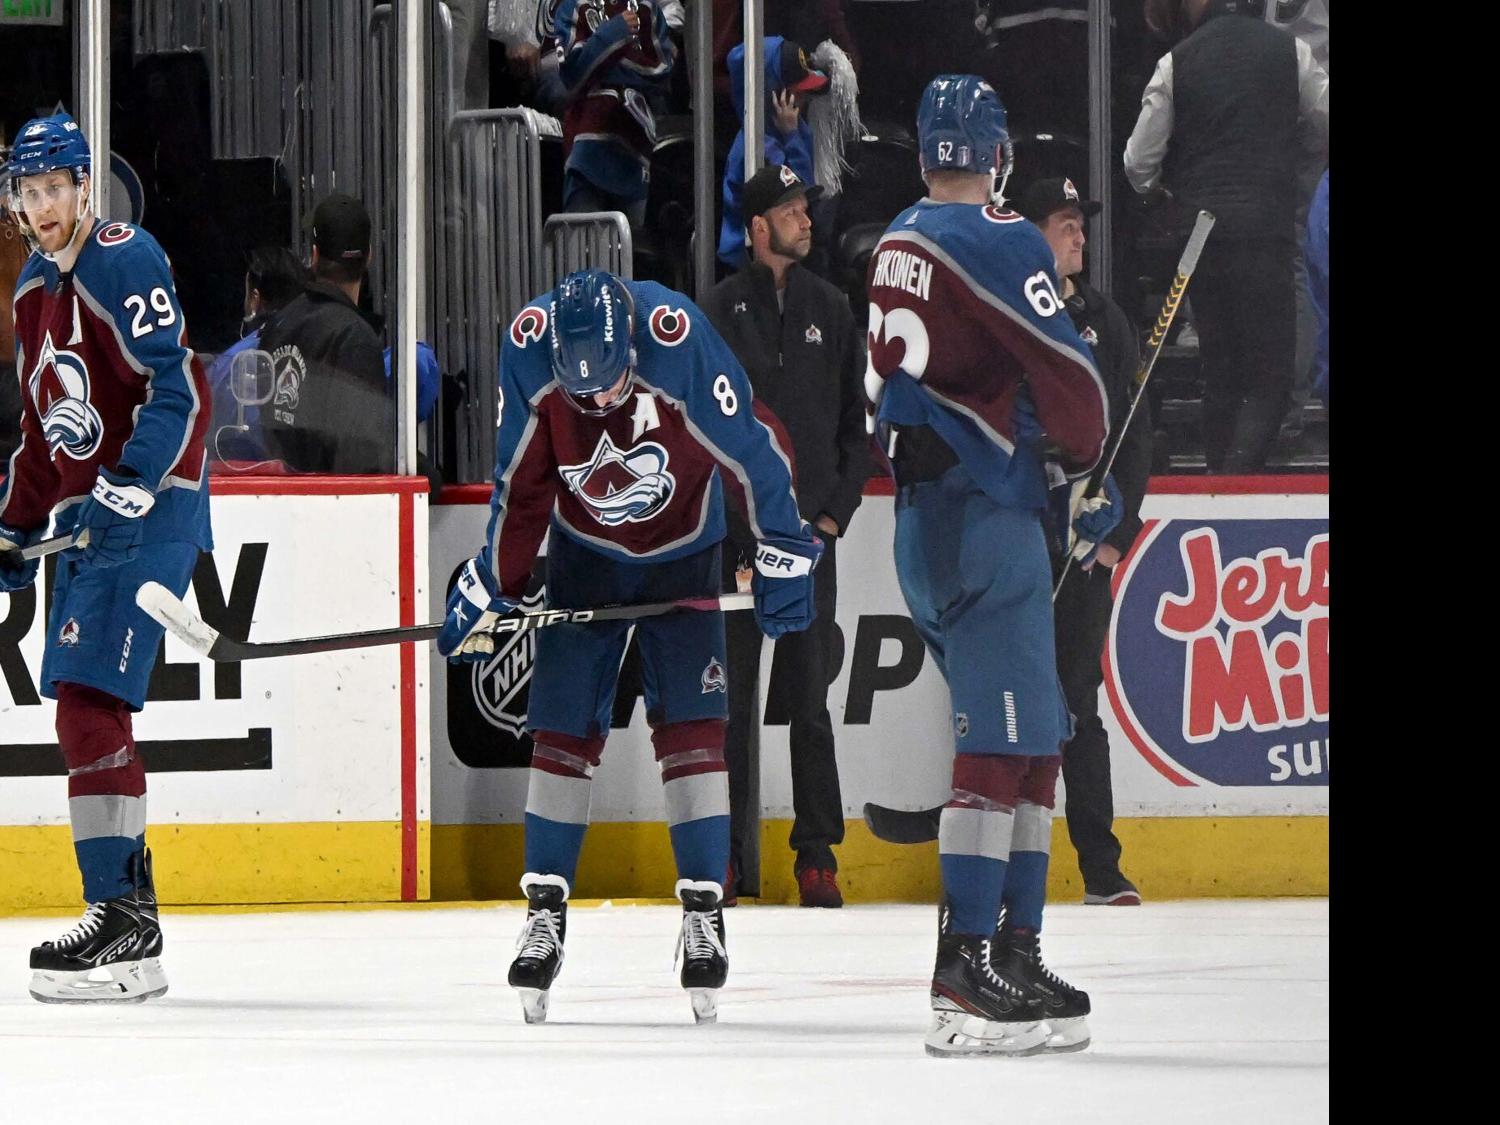 The @coloradoavalanche certainly hit the nail on the head with